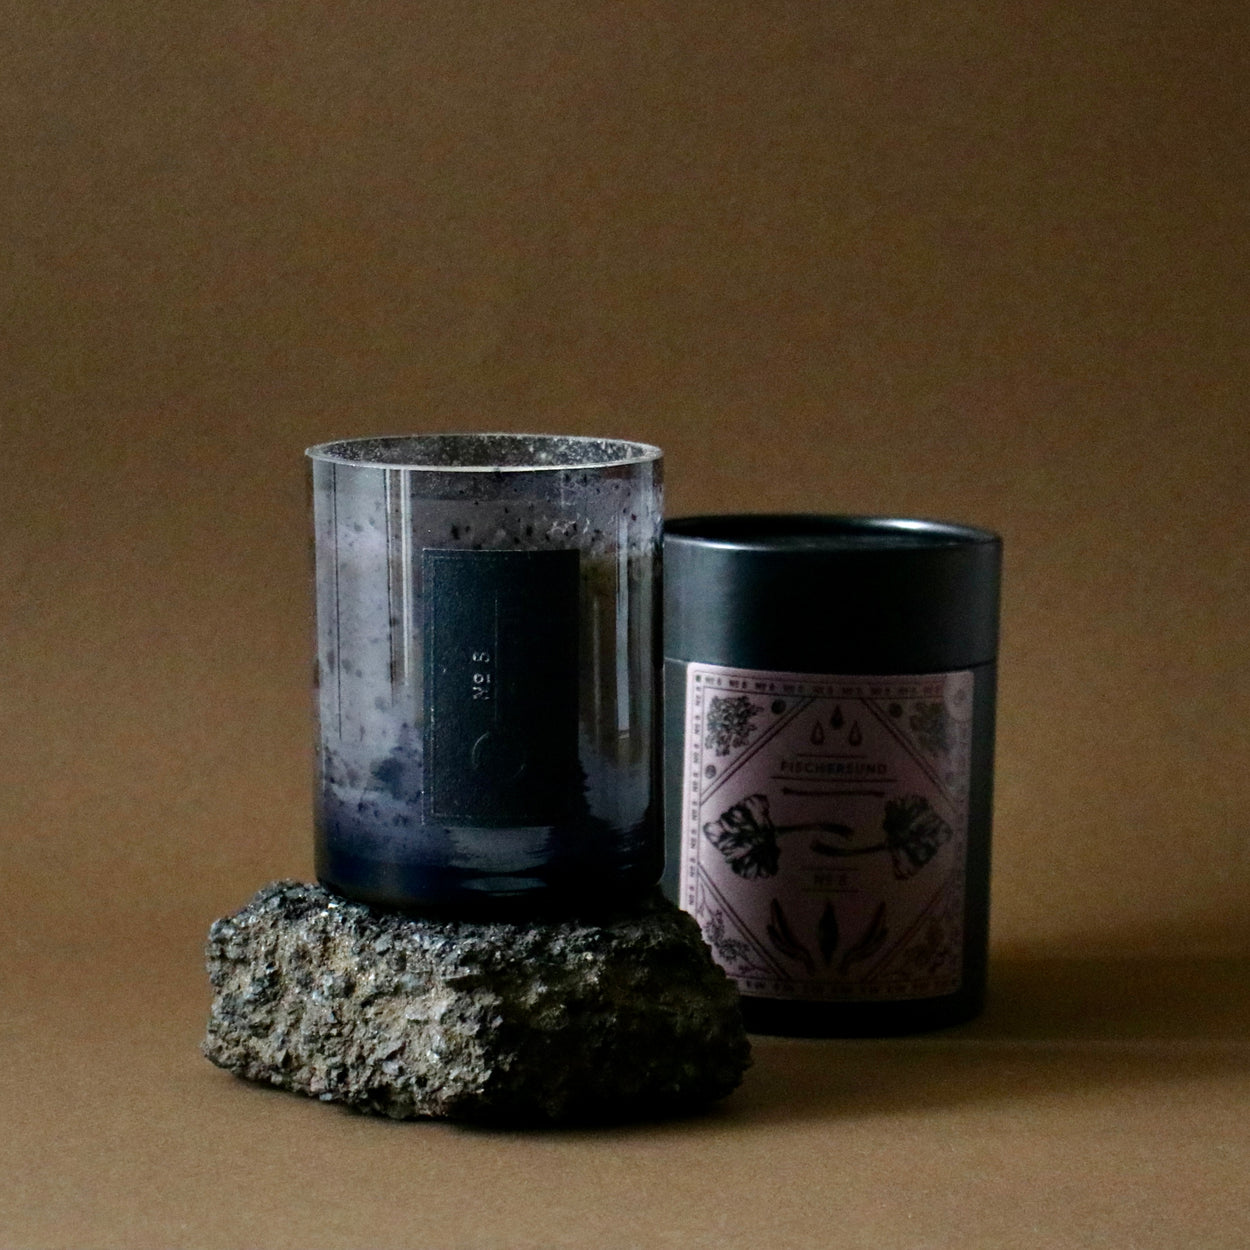 Fischersund No.8 candle on black rock with tube packaging against a brown backdrop.